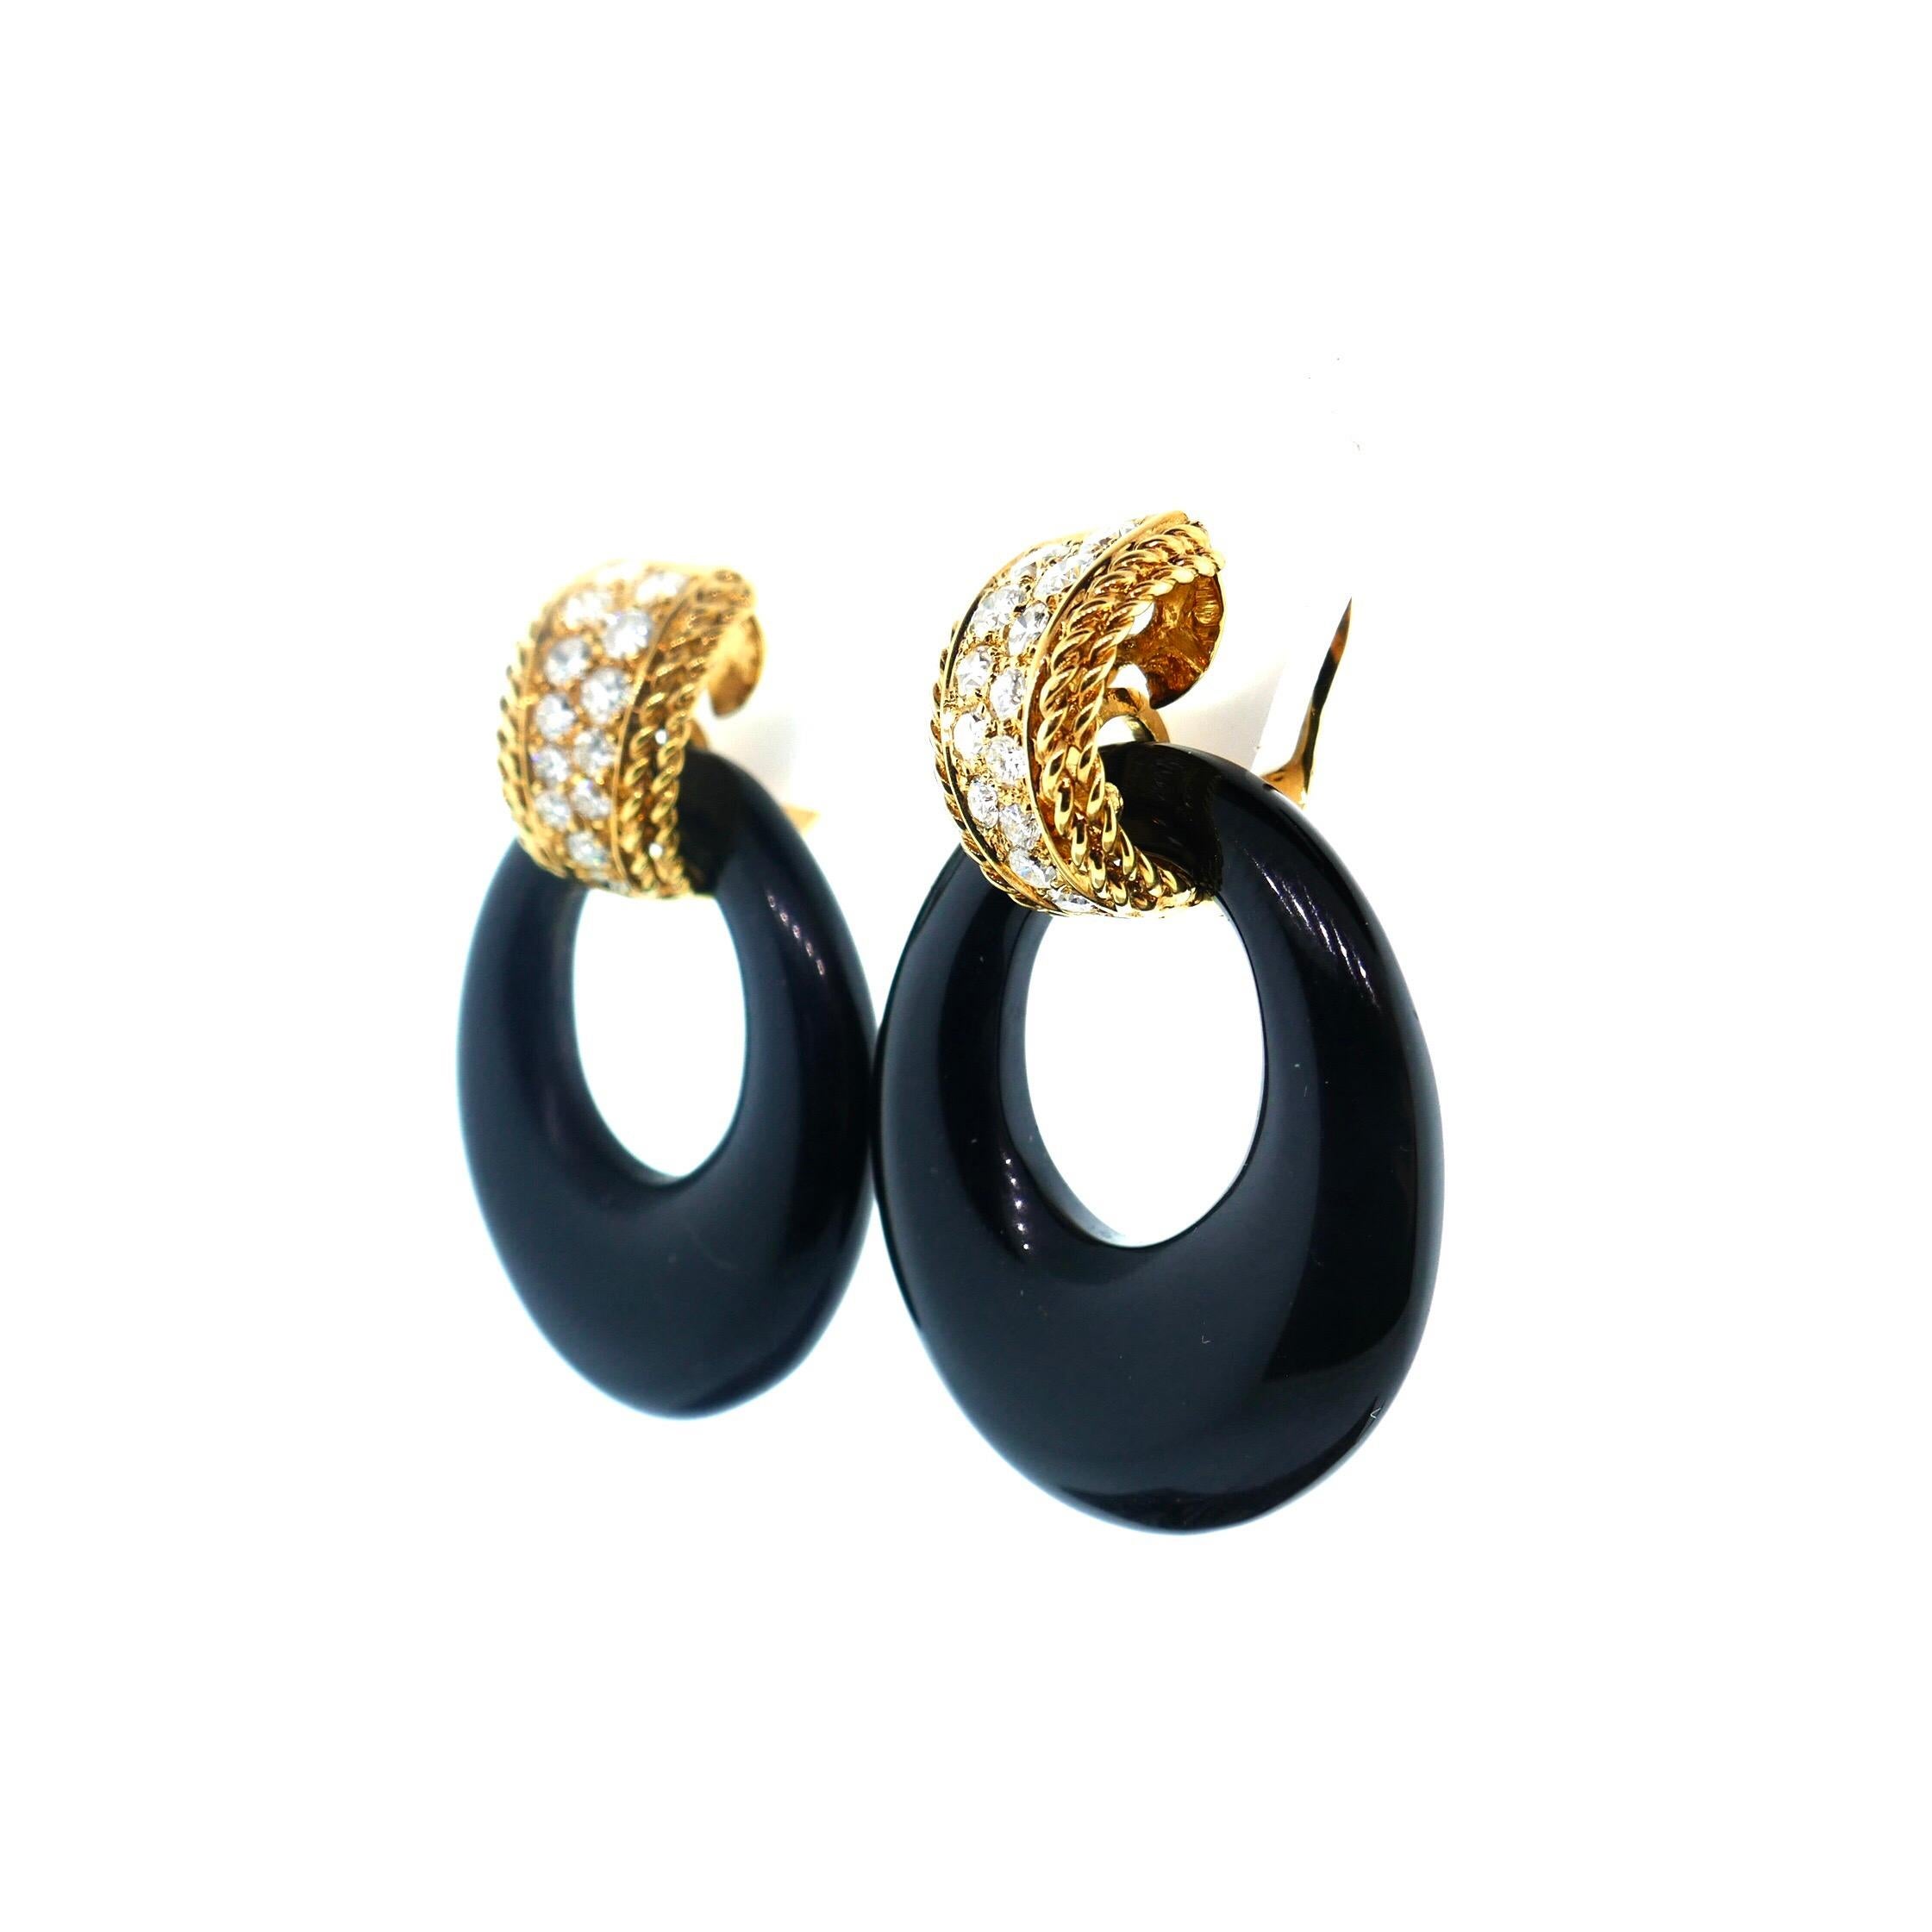 Van Cleef & Arpels Yellow Gold Diamond and Onyx Door Knocker Earrings

These rare vintage Van Cleef & Arpels clip-back earrings are crafted in 18k yellow gold and accented with brilliant-cut round diamonds (over one carat) and black onyx hoops. Made